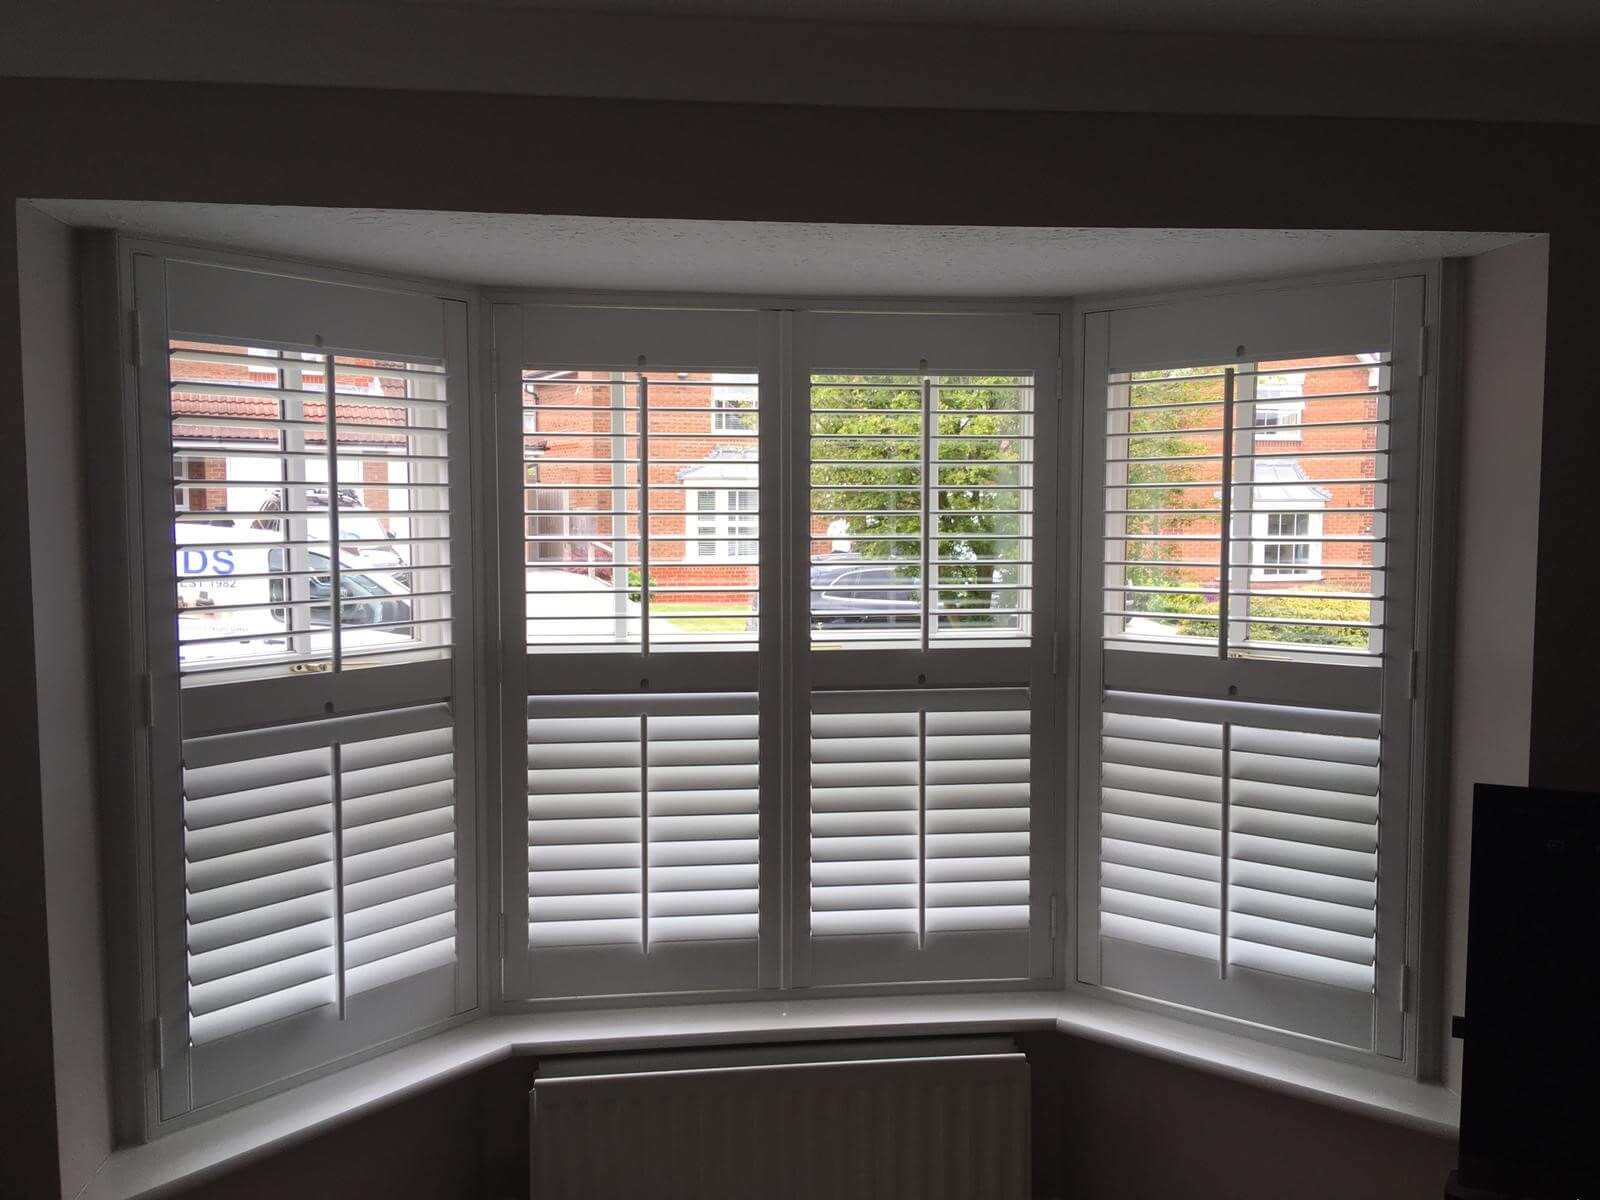 Suppliers of Waterproof Plantation Shutters For Bathrooms UK